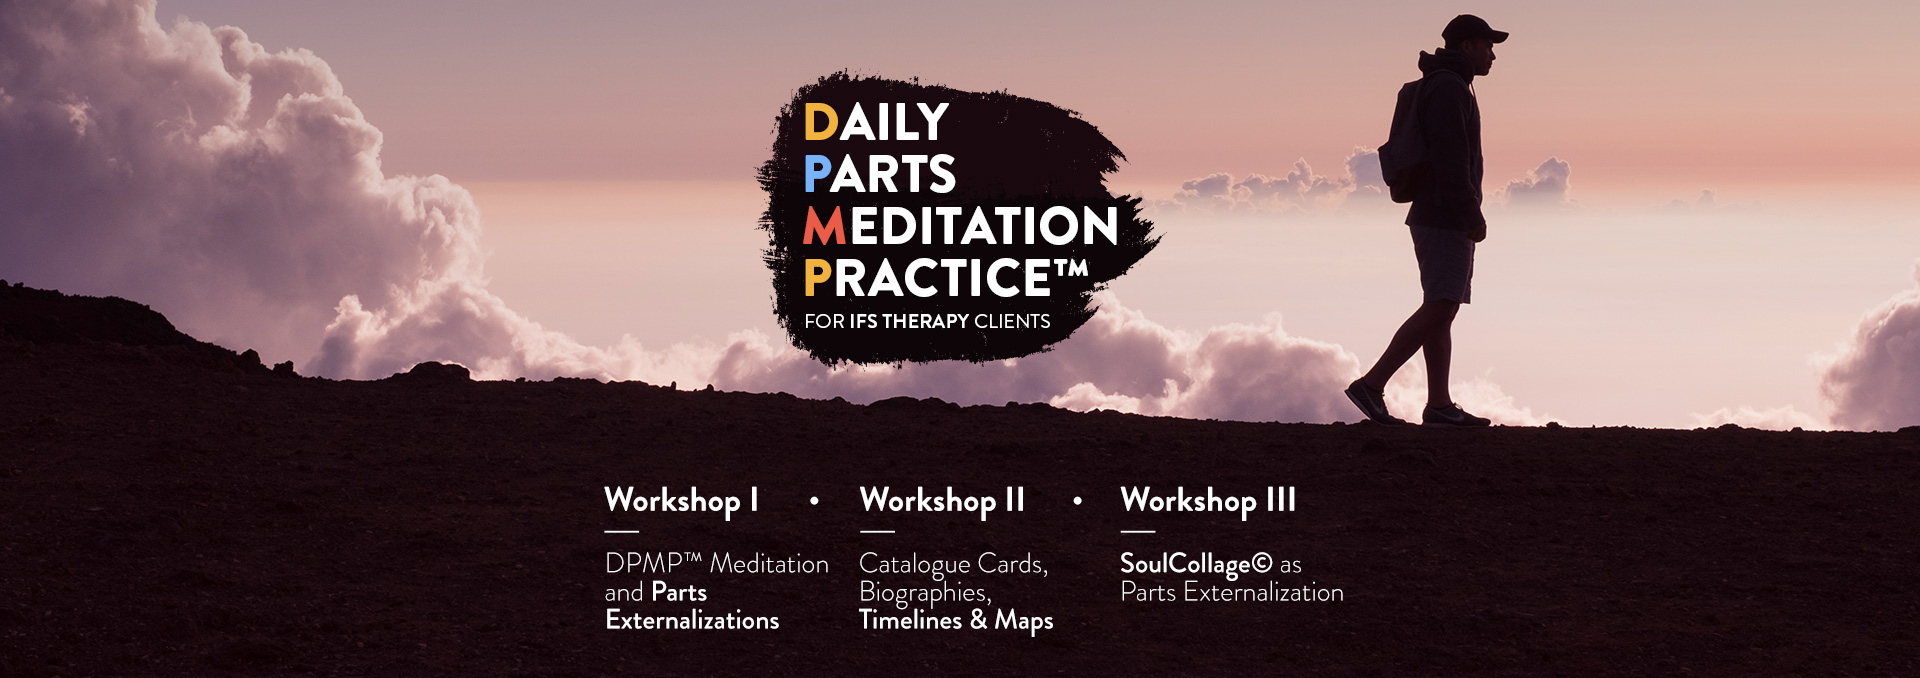 Daily Parts Meditation Practice™ for Clients